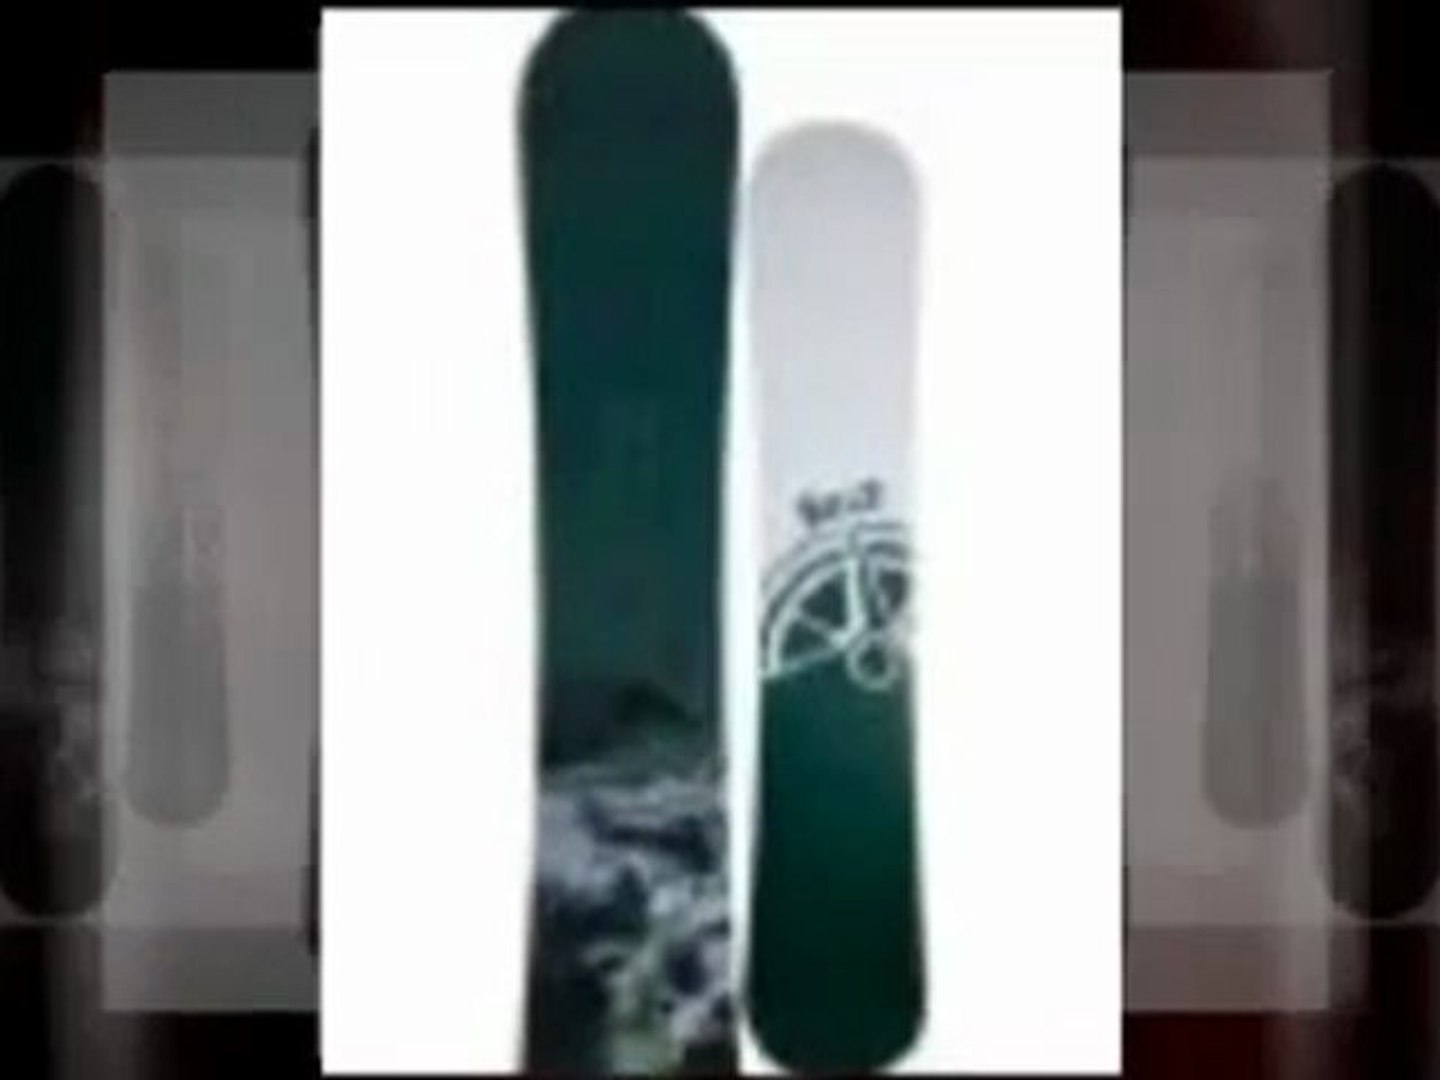 K2 access snowboard - video Dailymotion